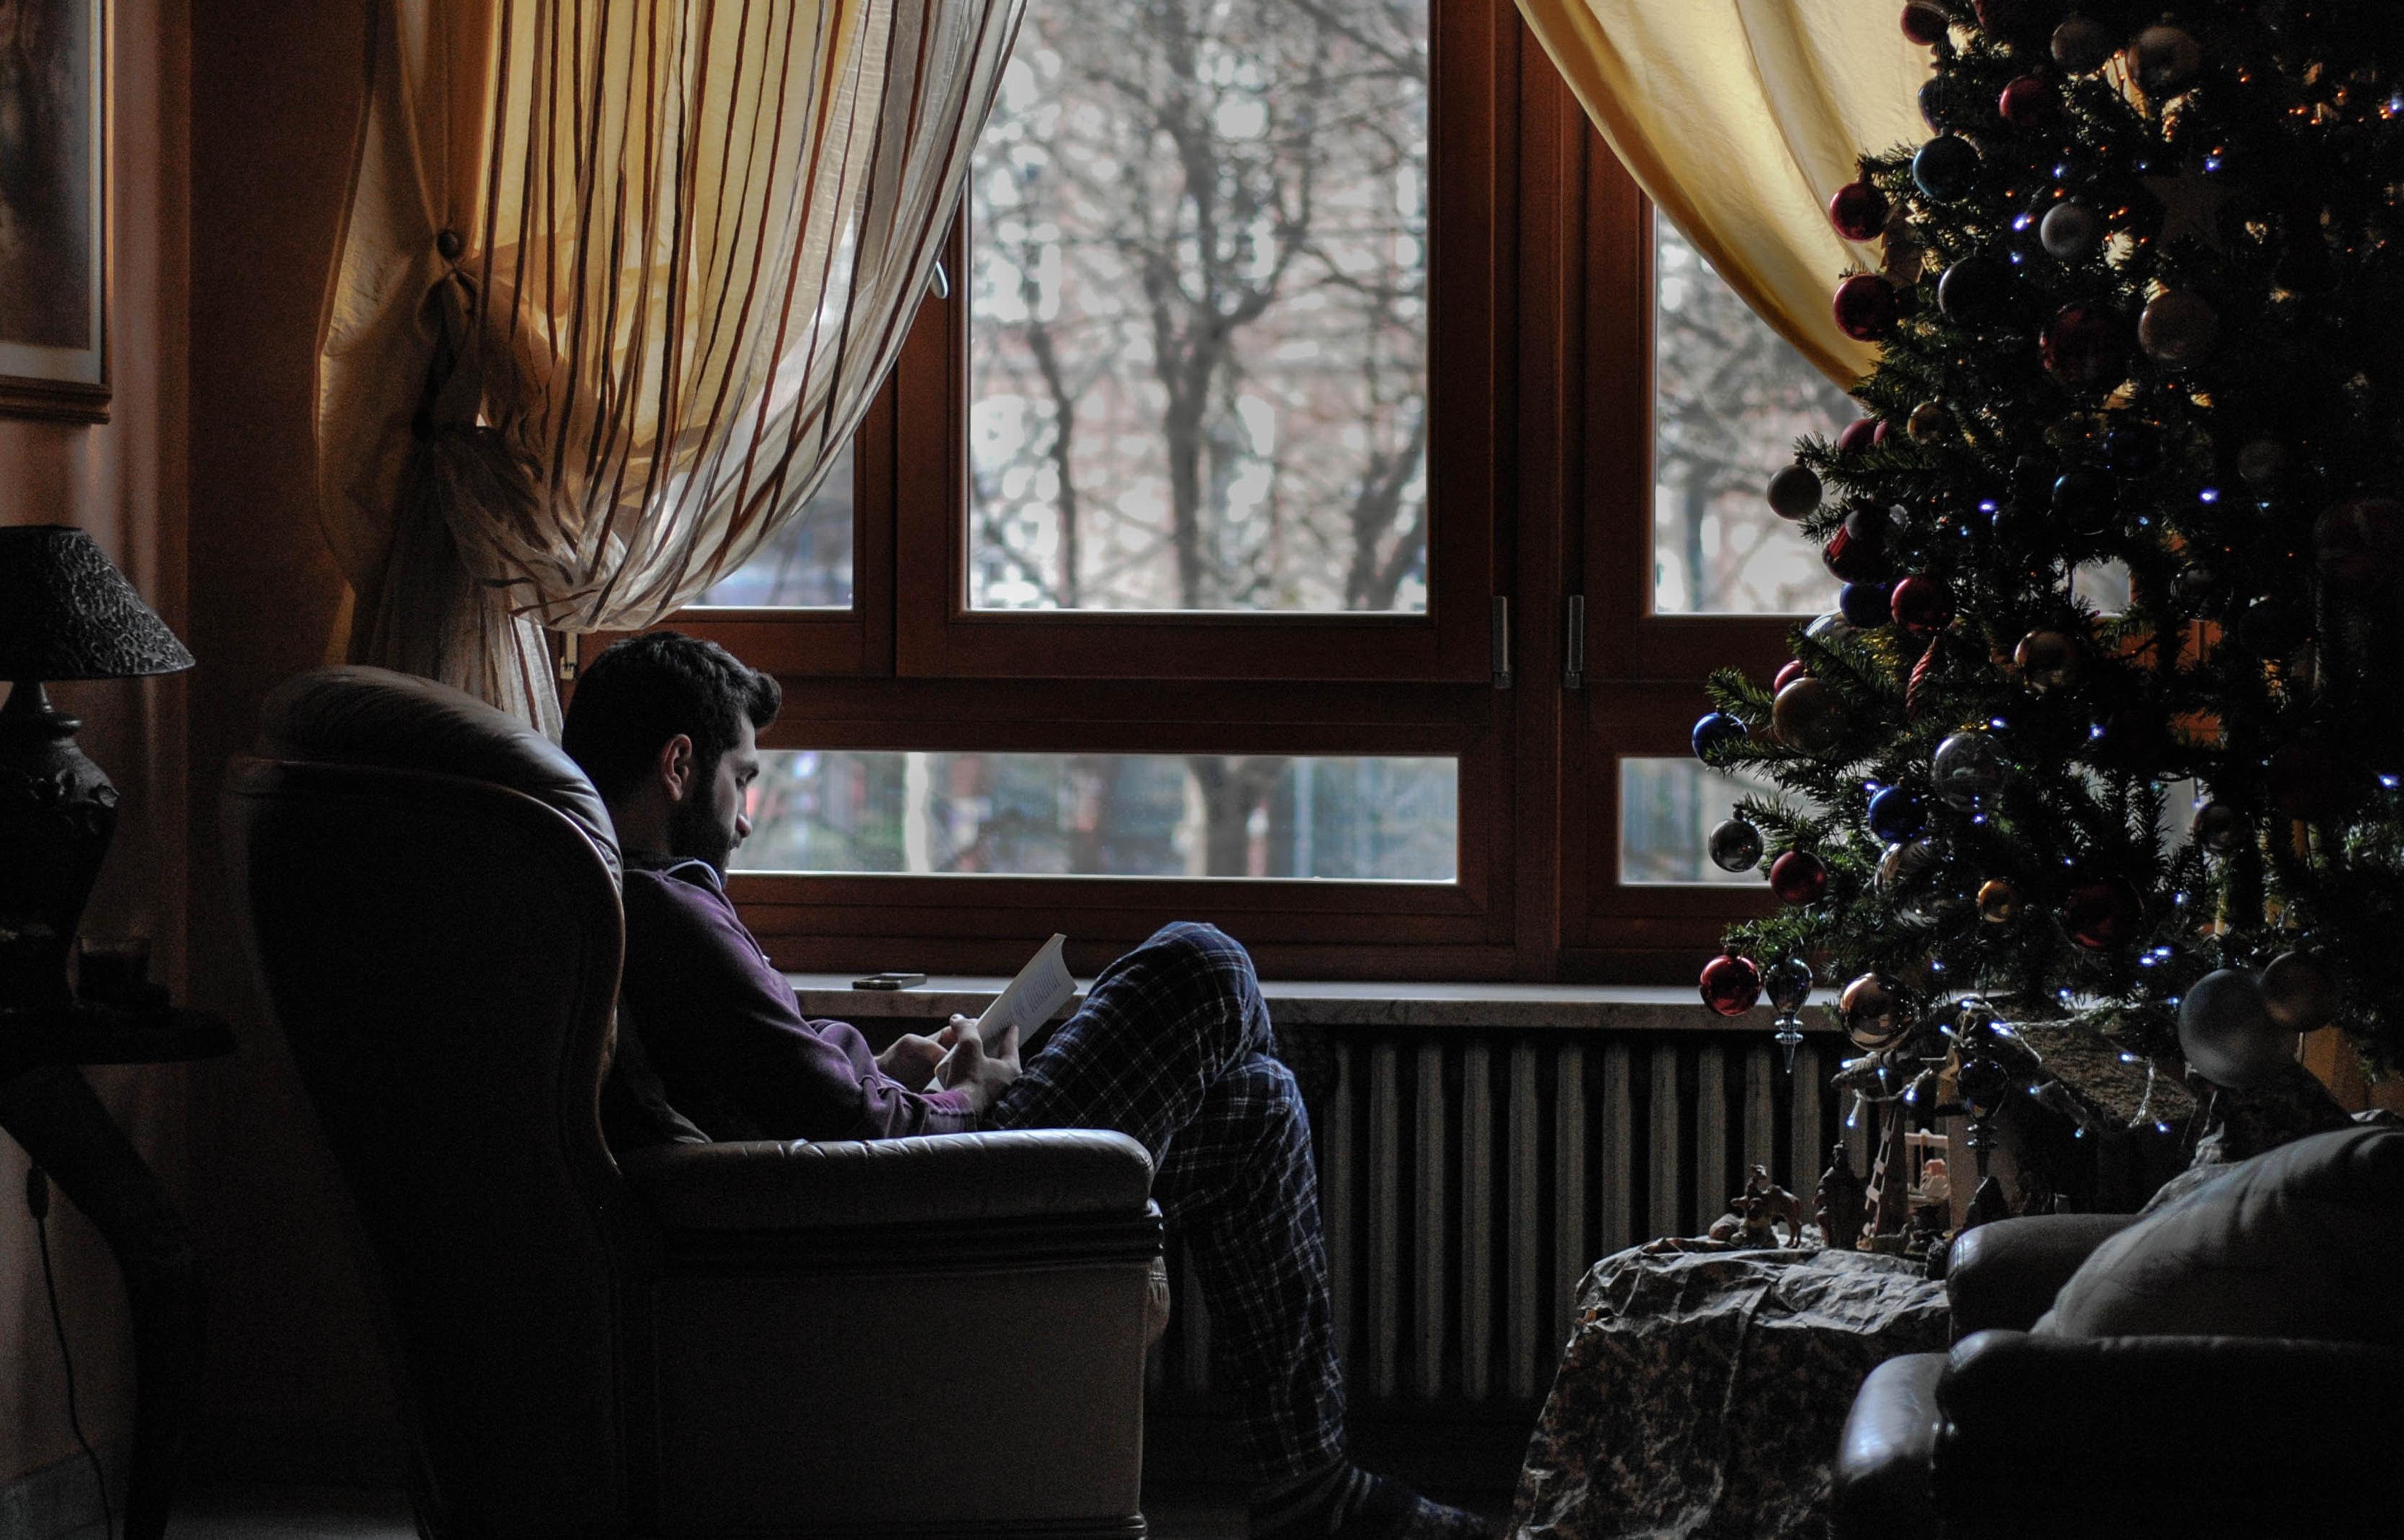 A man sitting in an armchair next to a Christmas tree and reading a book